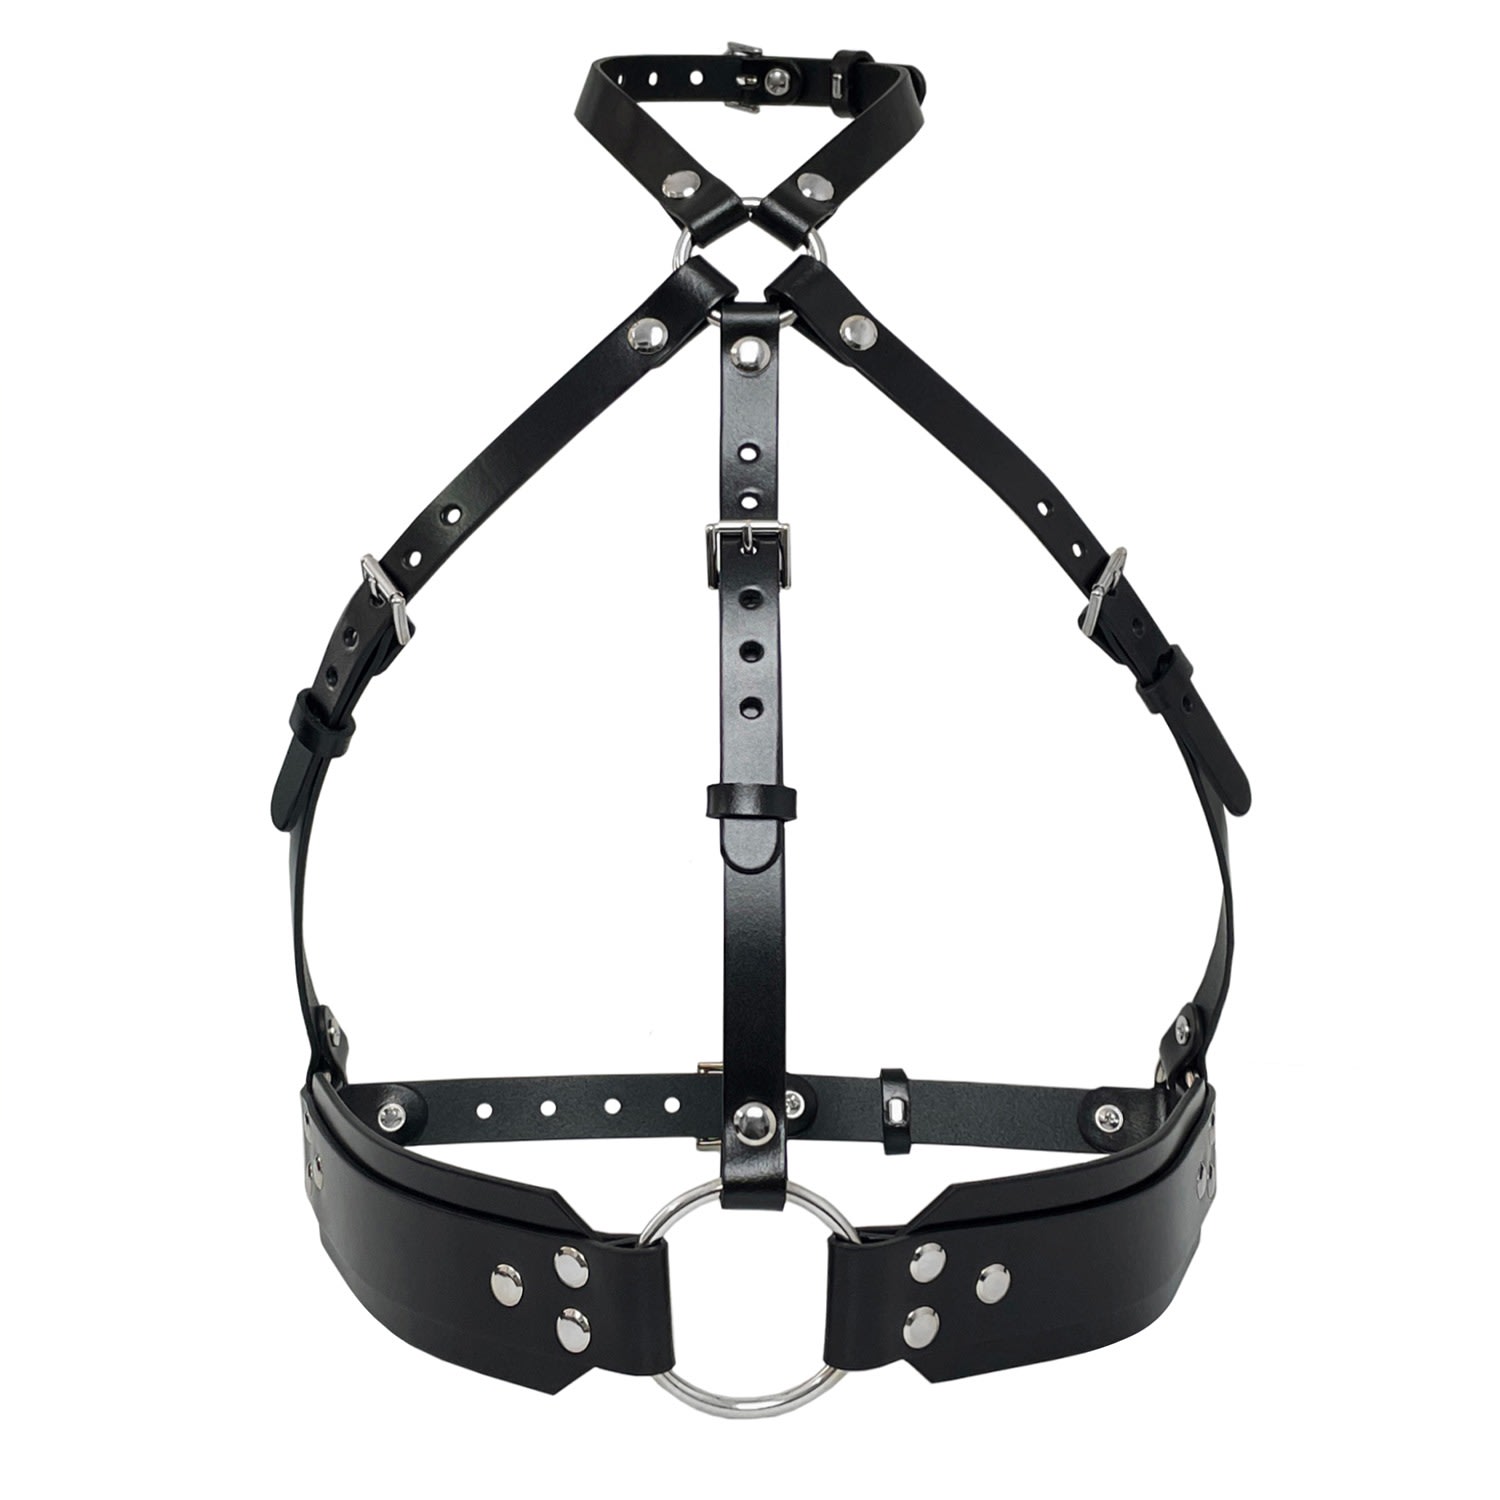 Haute Cuir Women's Black Overbust Leather Harness